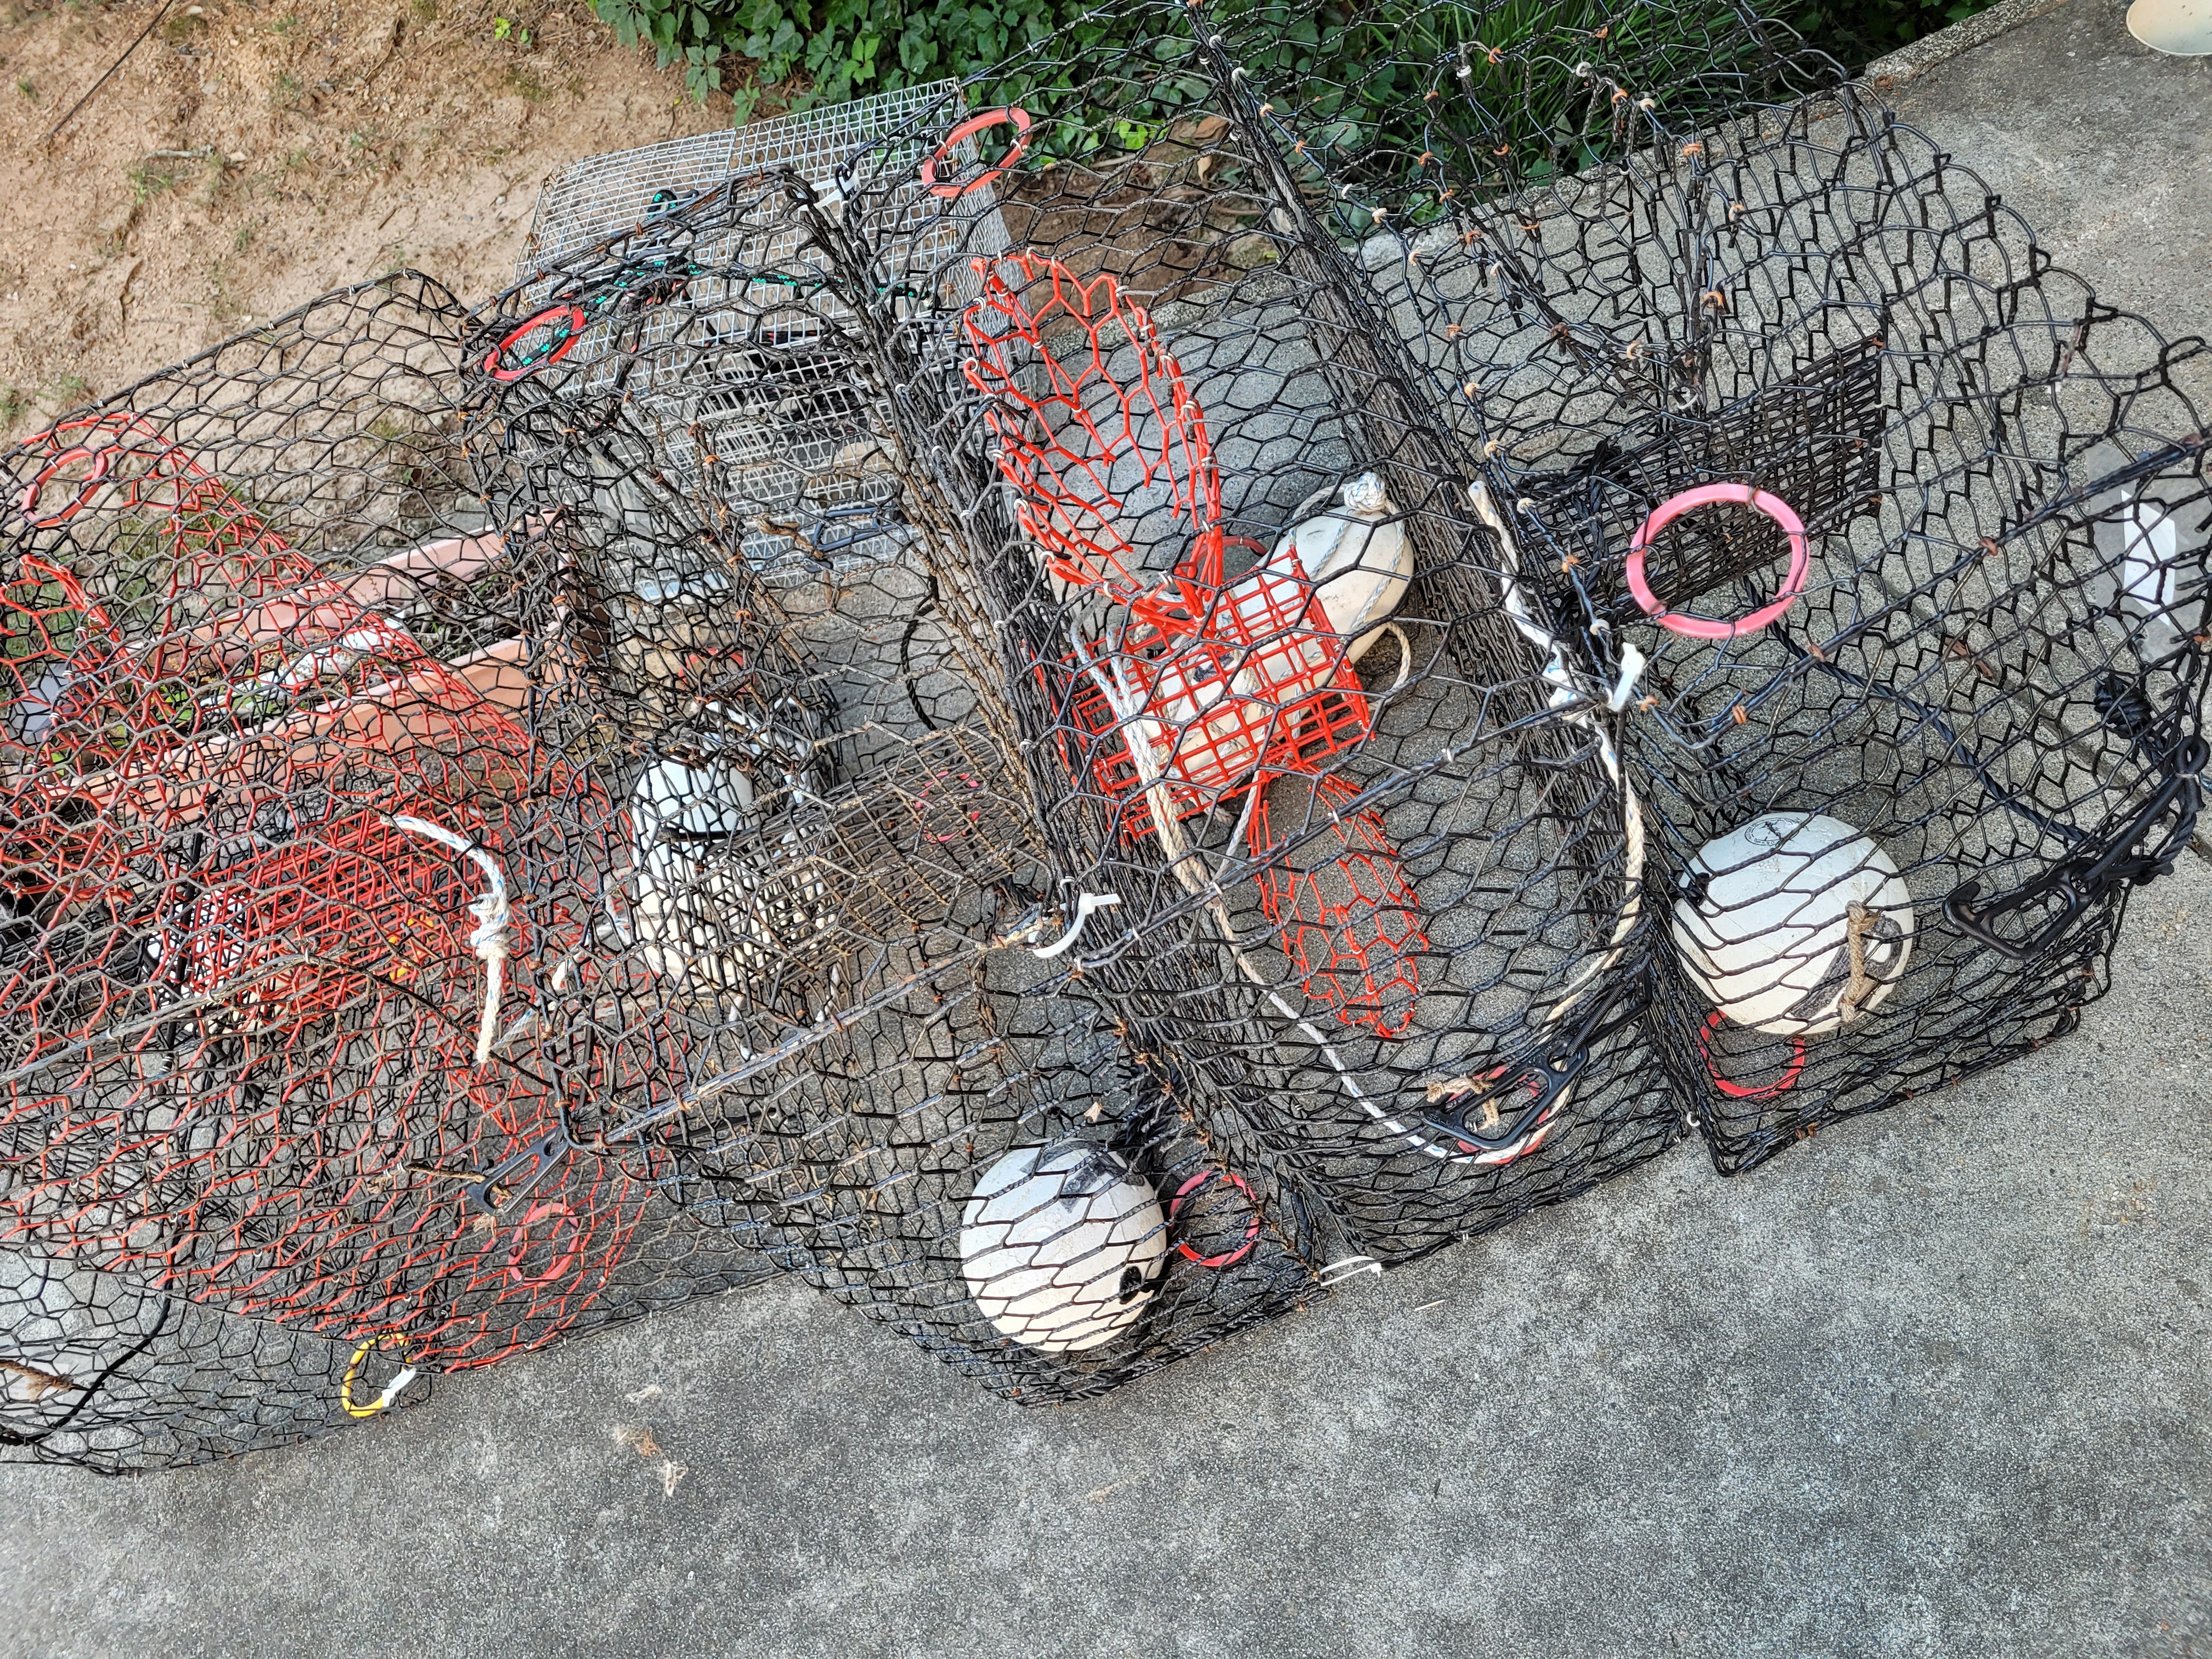 Blue Crab Trapping in Florida - How to Set Up Your Blue Crab Traps